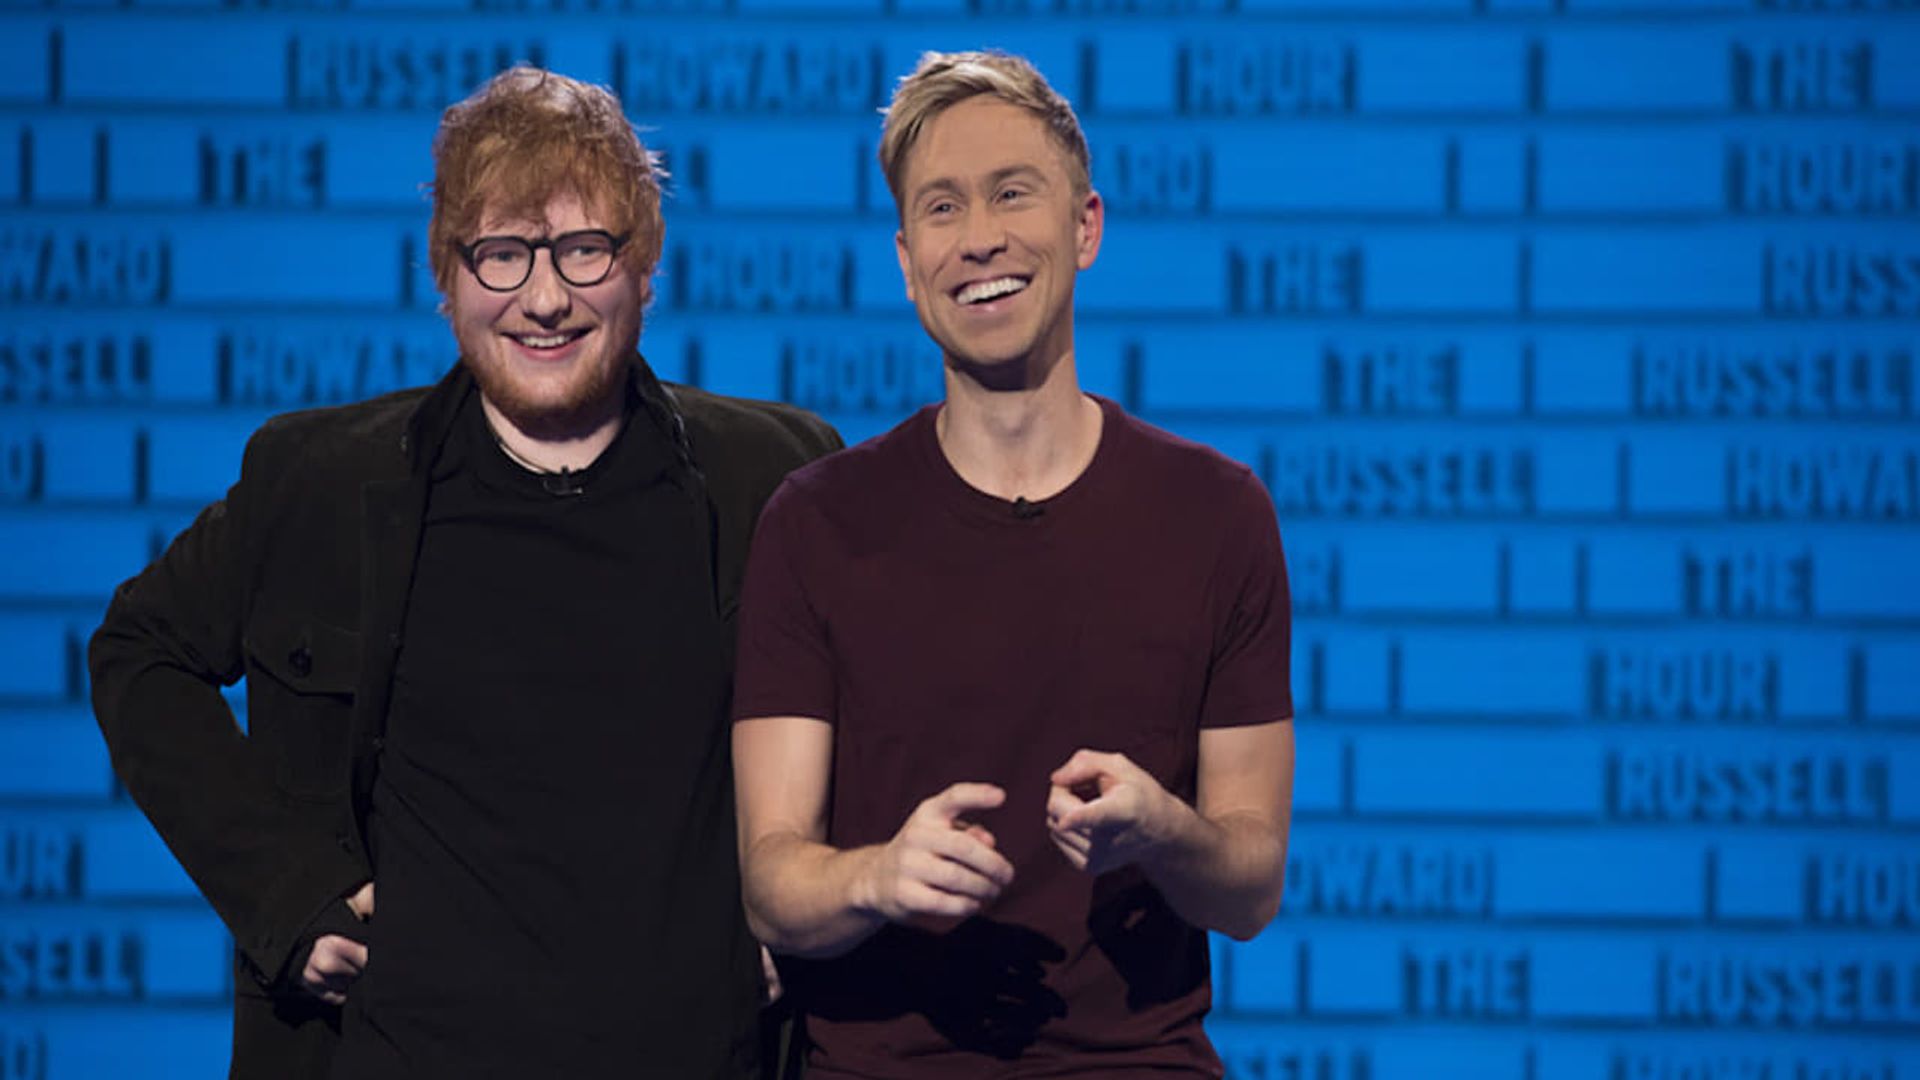 The Russell Howard Hour background